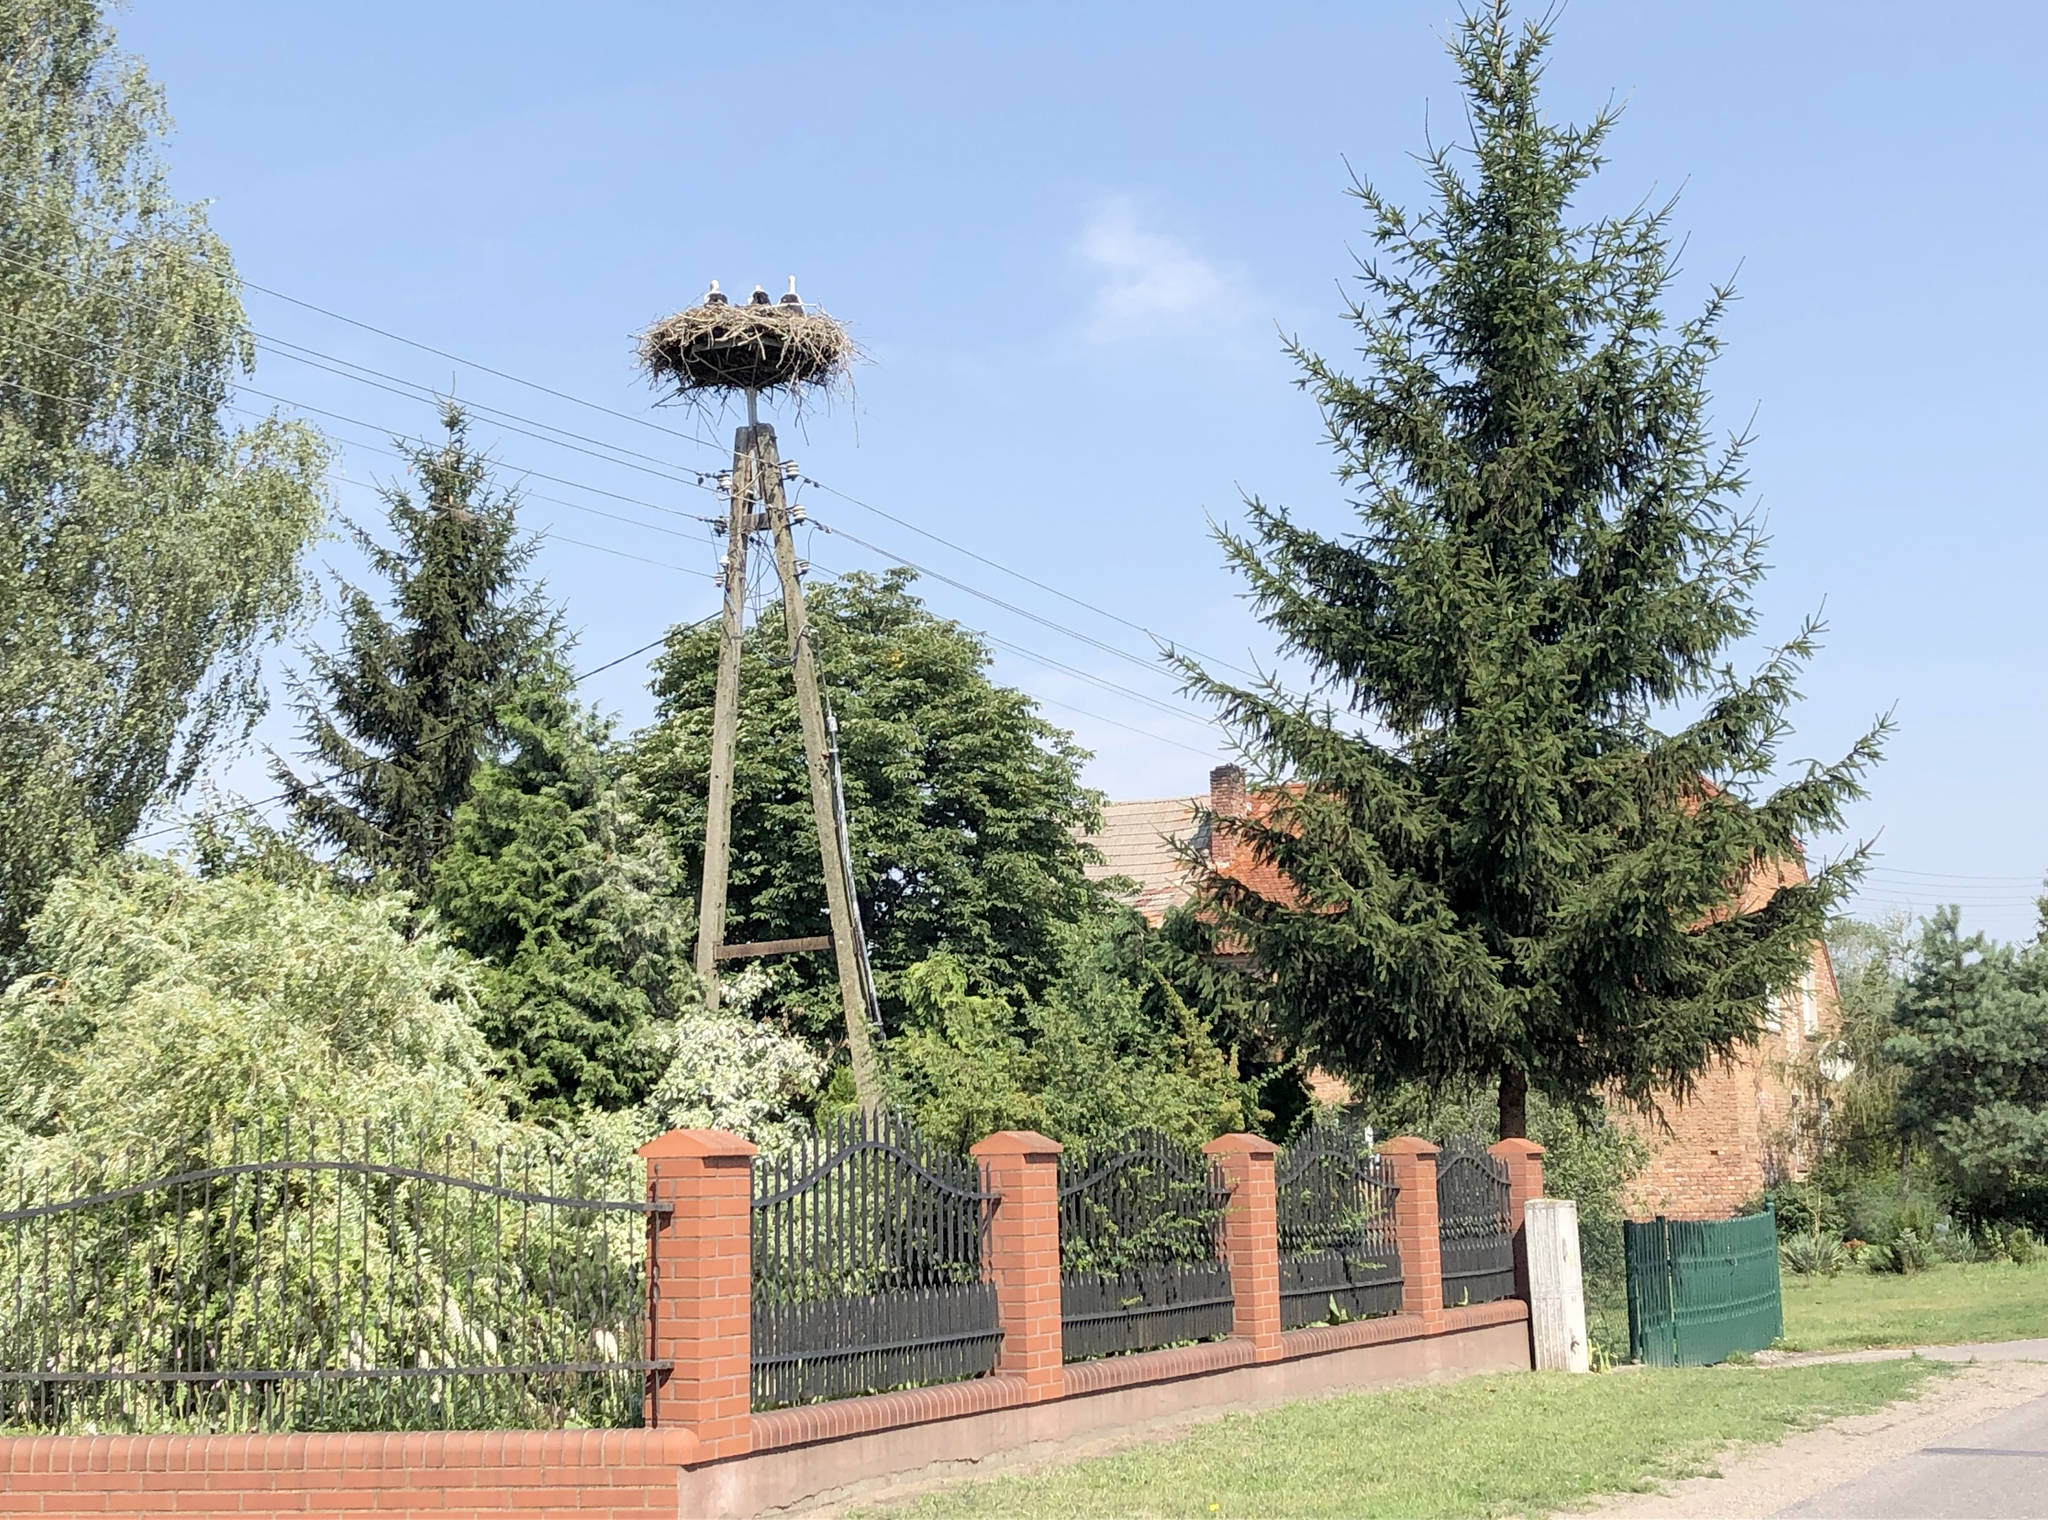 A stork nest rests on an artificial nest platform atop an electrical pole in Poland. (Photo courtesy of Kenai National Wildlife Refuge)